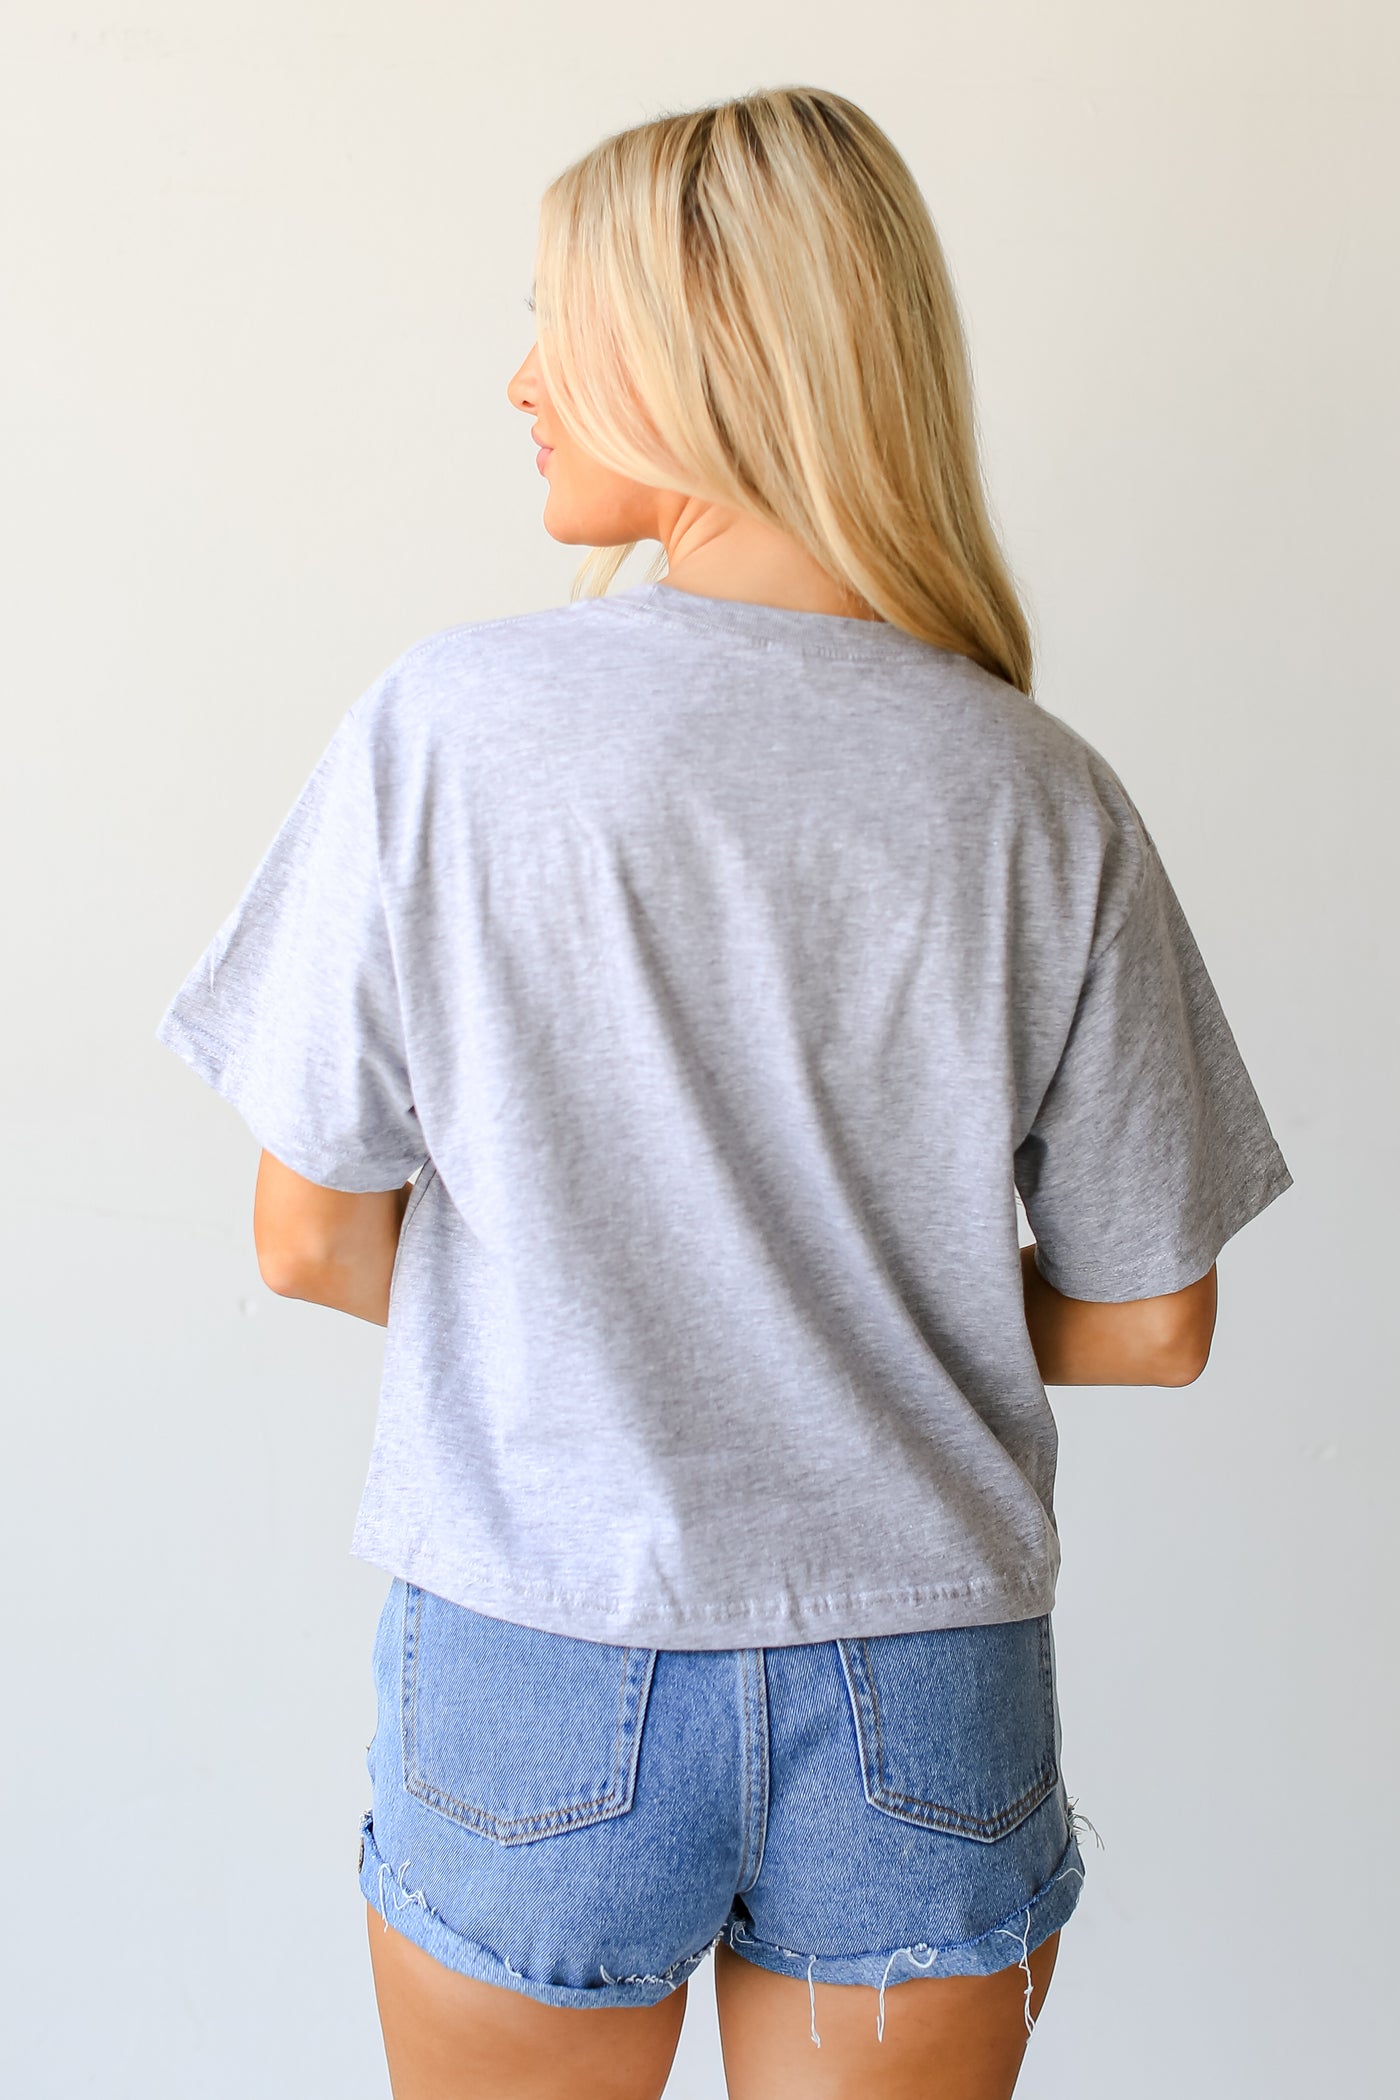 Heather Grey Nashville Cropped Tee back view